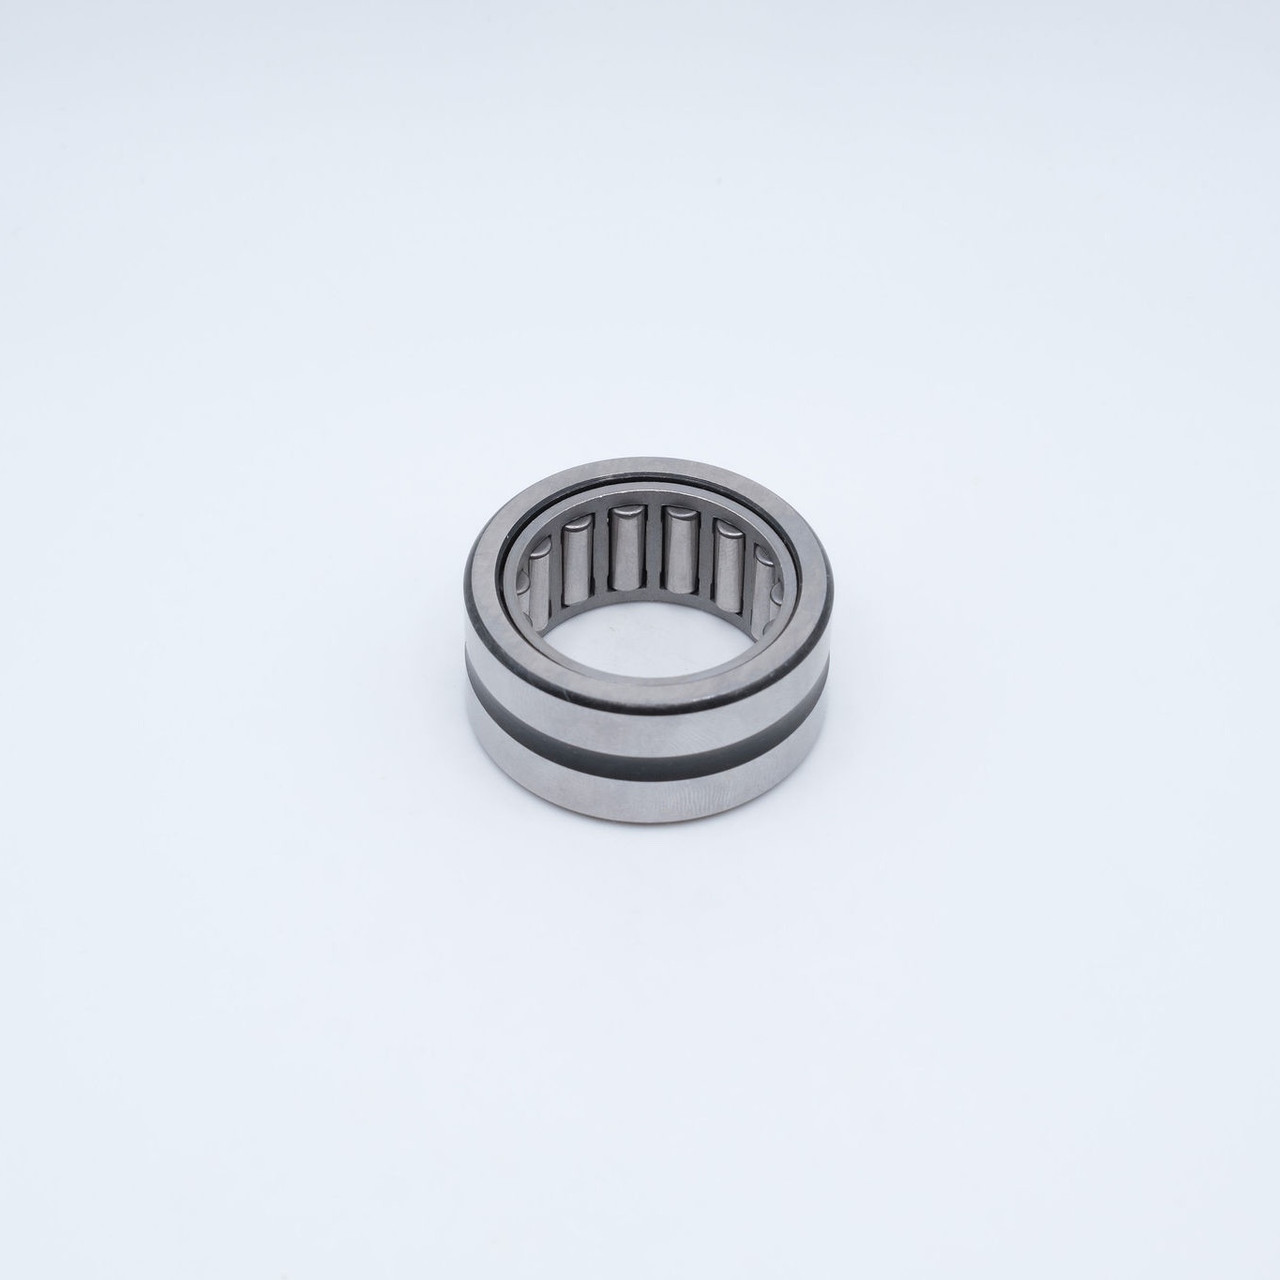 RNA4909 Machined Needle Roller 52x68x22mm Bottom View